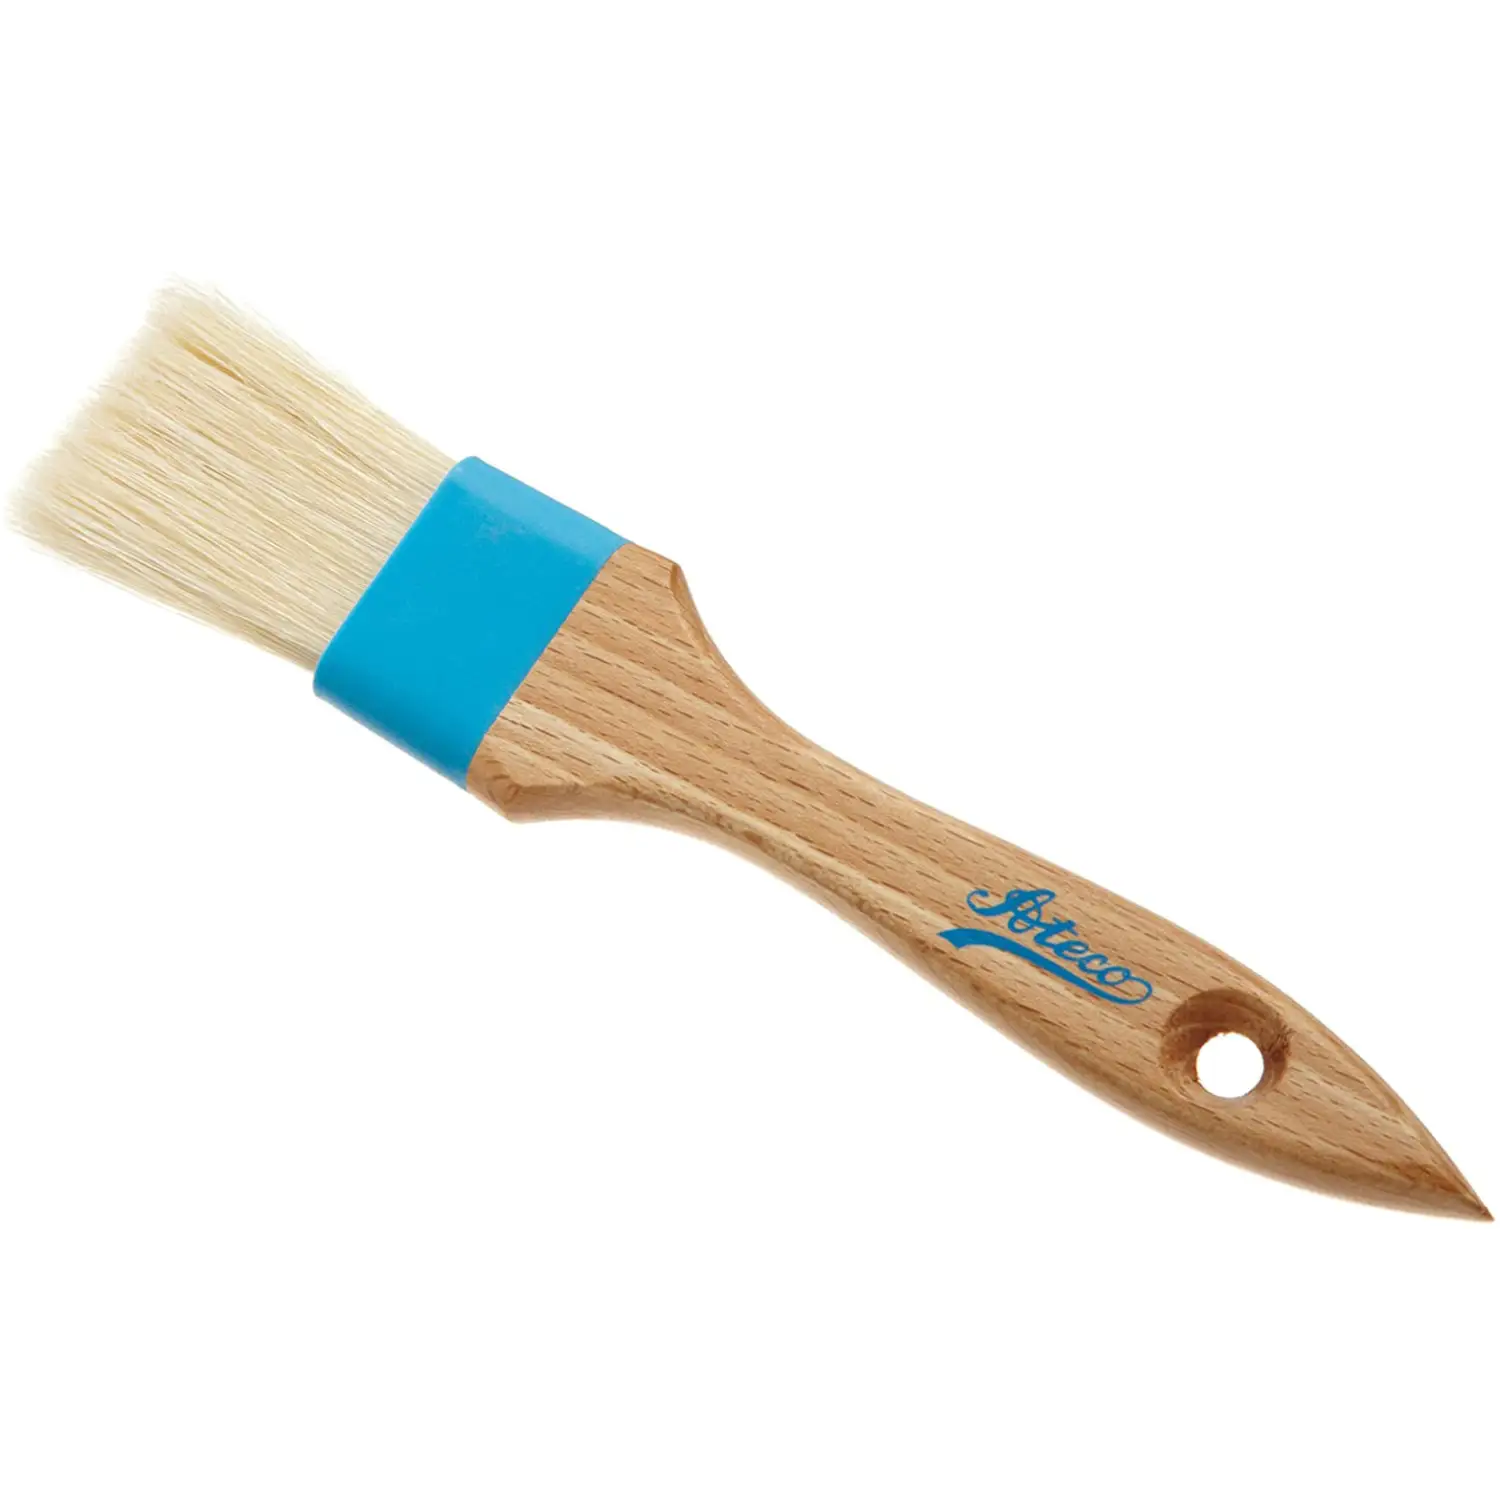 Ateco Solid Ferrule 1.5 Pastry Brush with Wood Handle 60215